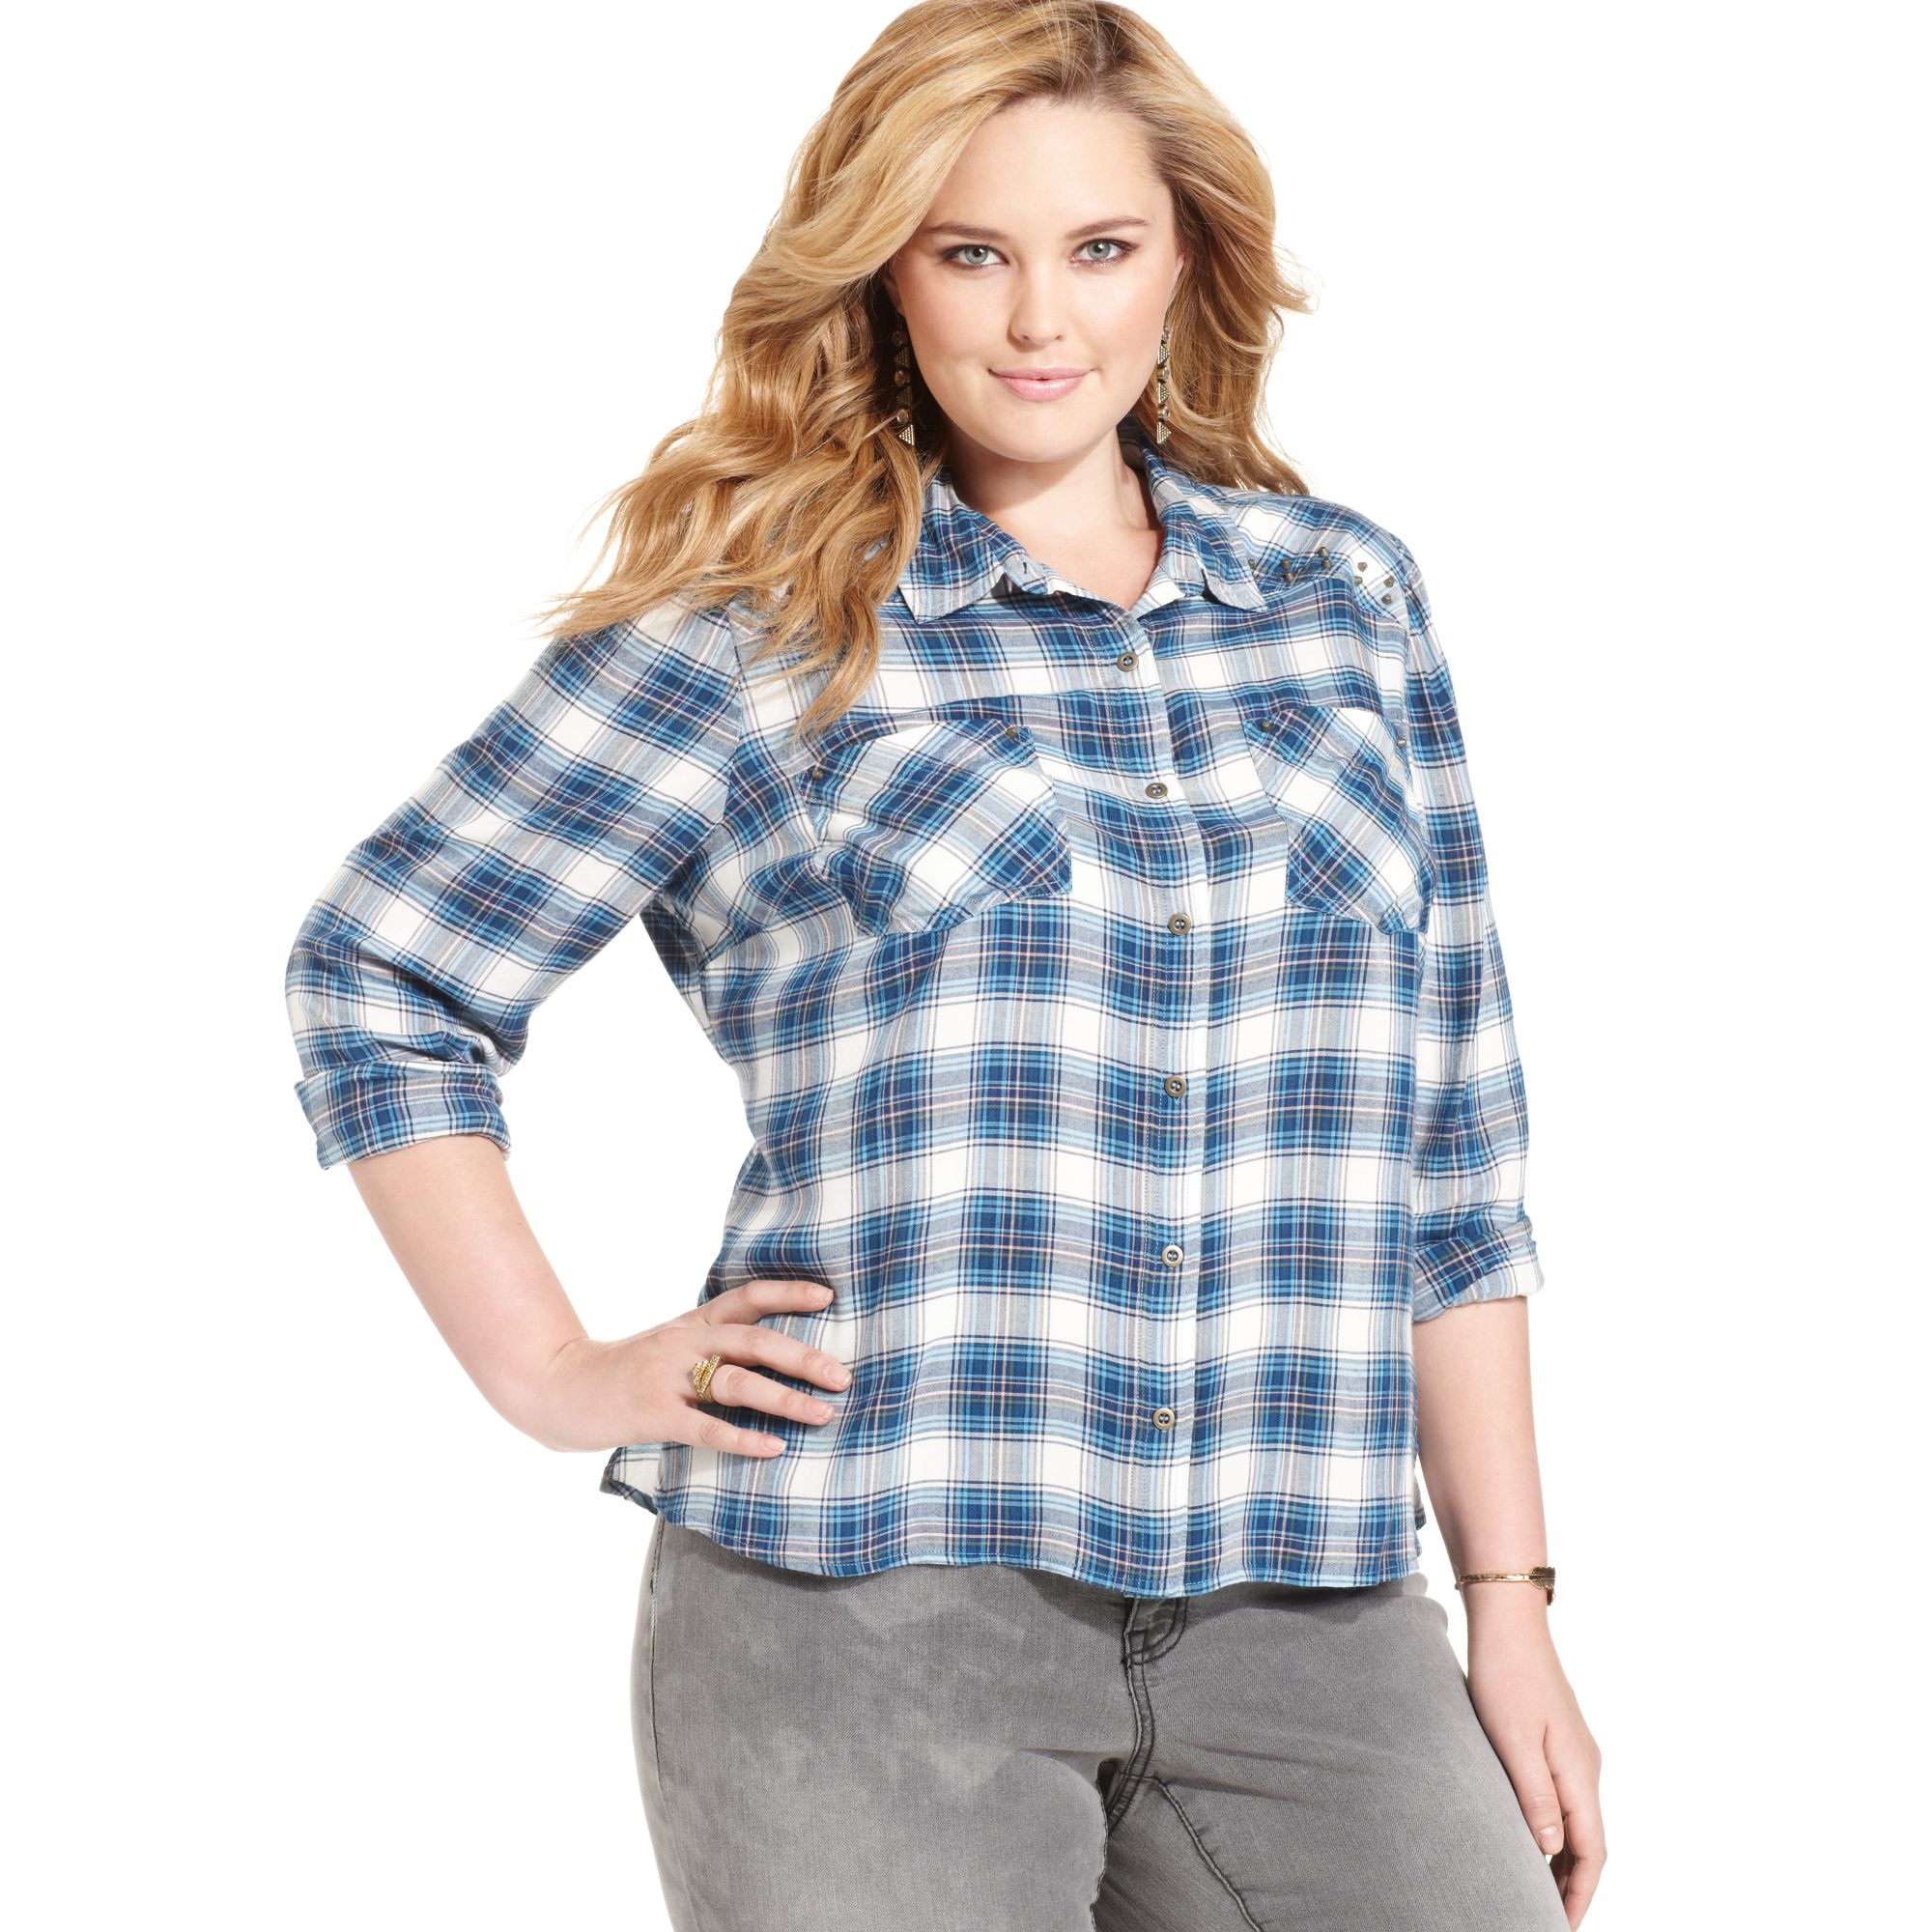 Jessica simpson Long Sleeve Plaid Studded Shirt in Blue | Lyst